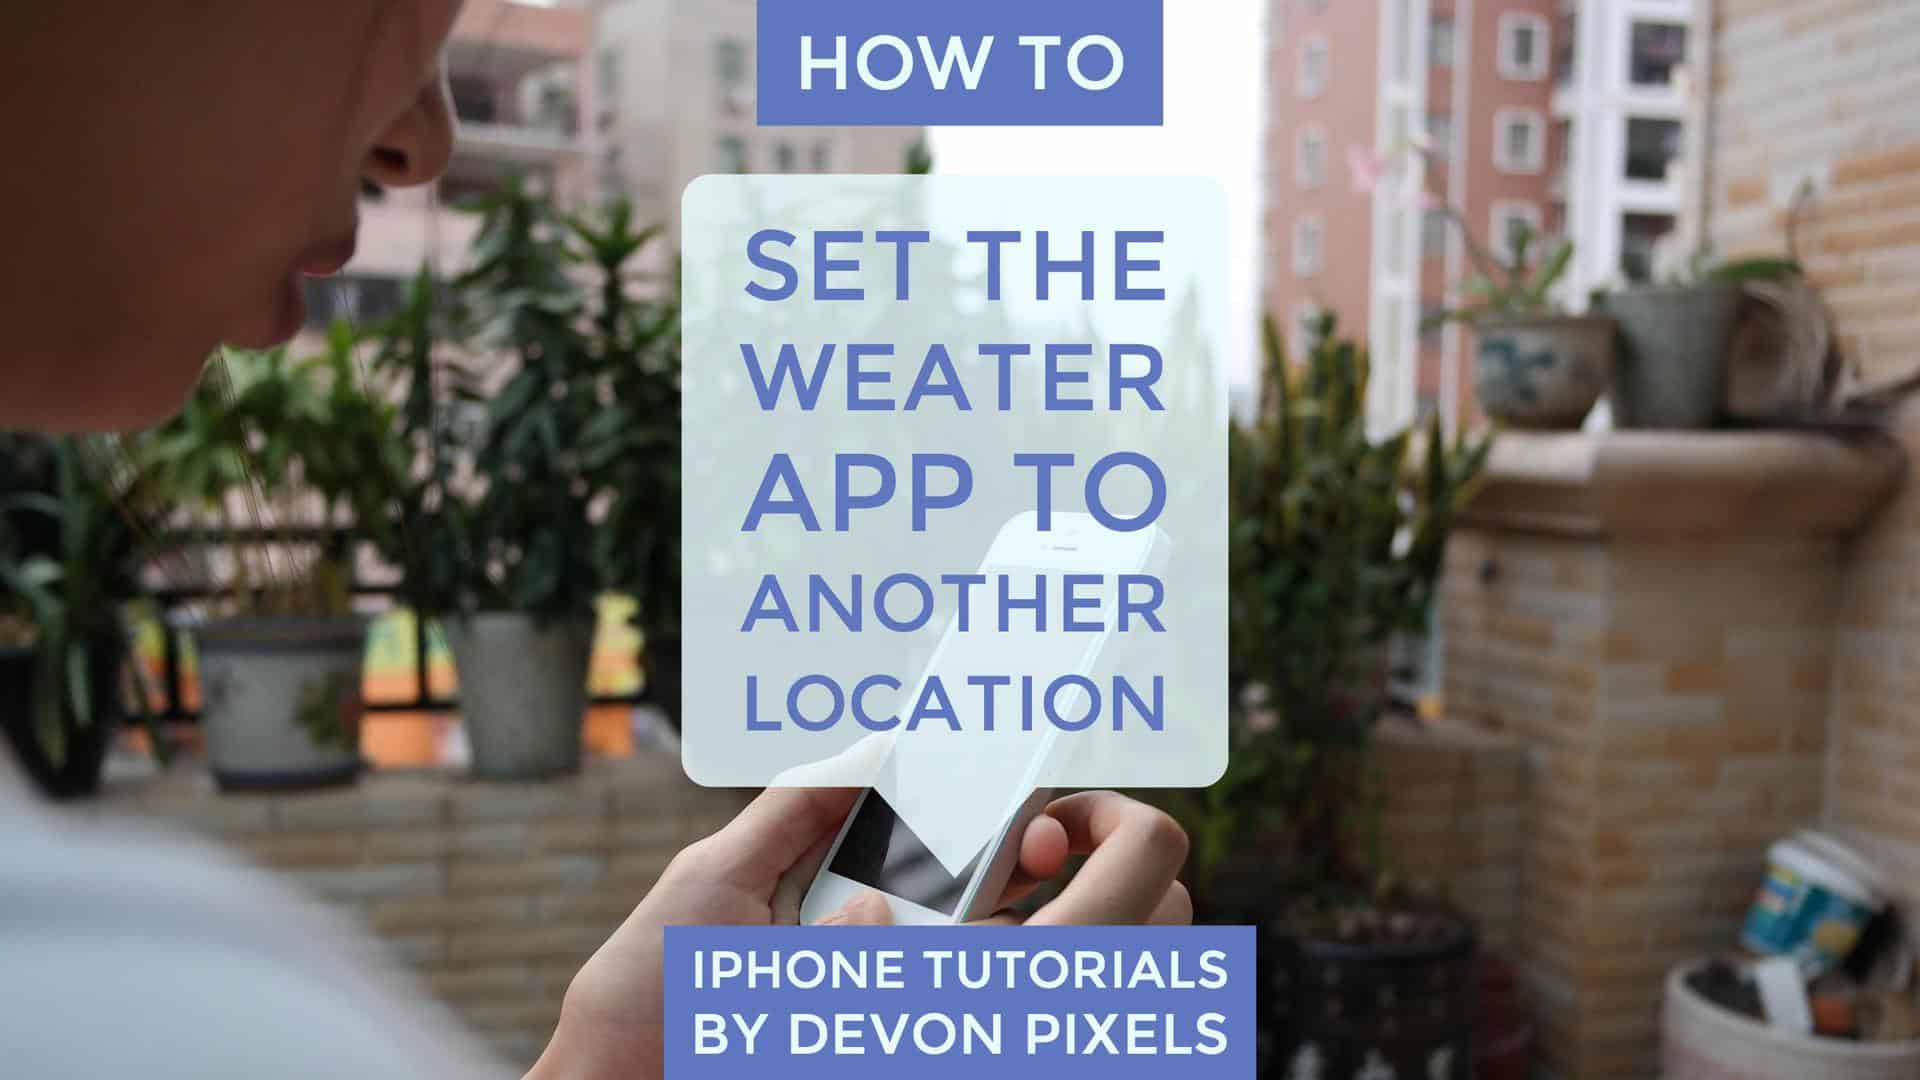 How to Set the Weather App to Another Location on an iPhone